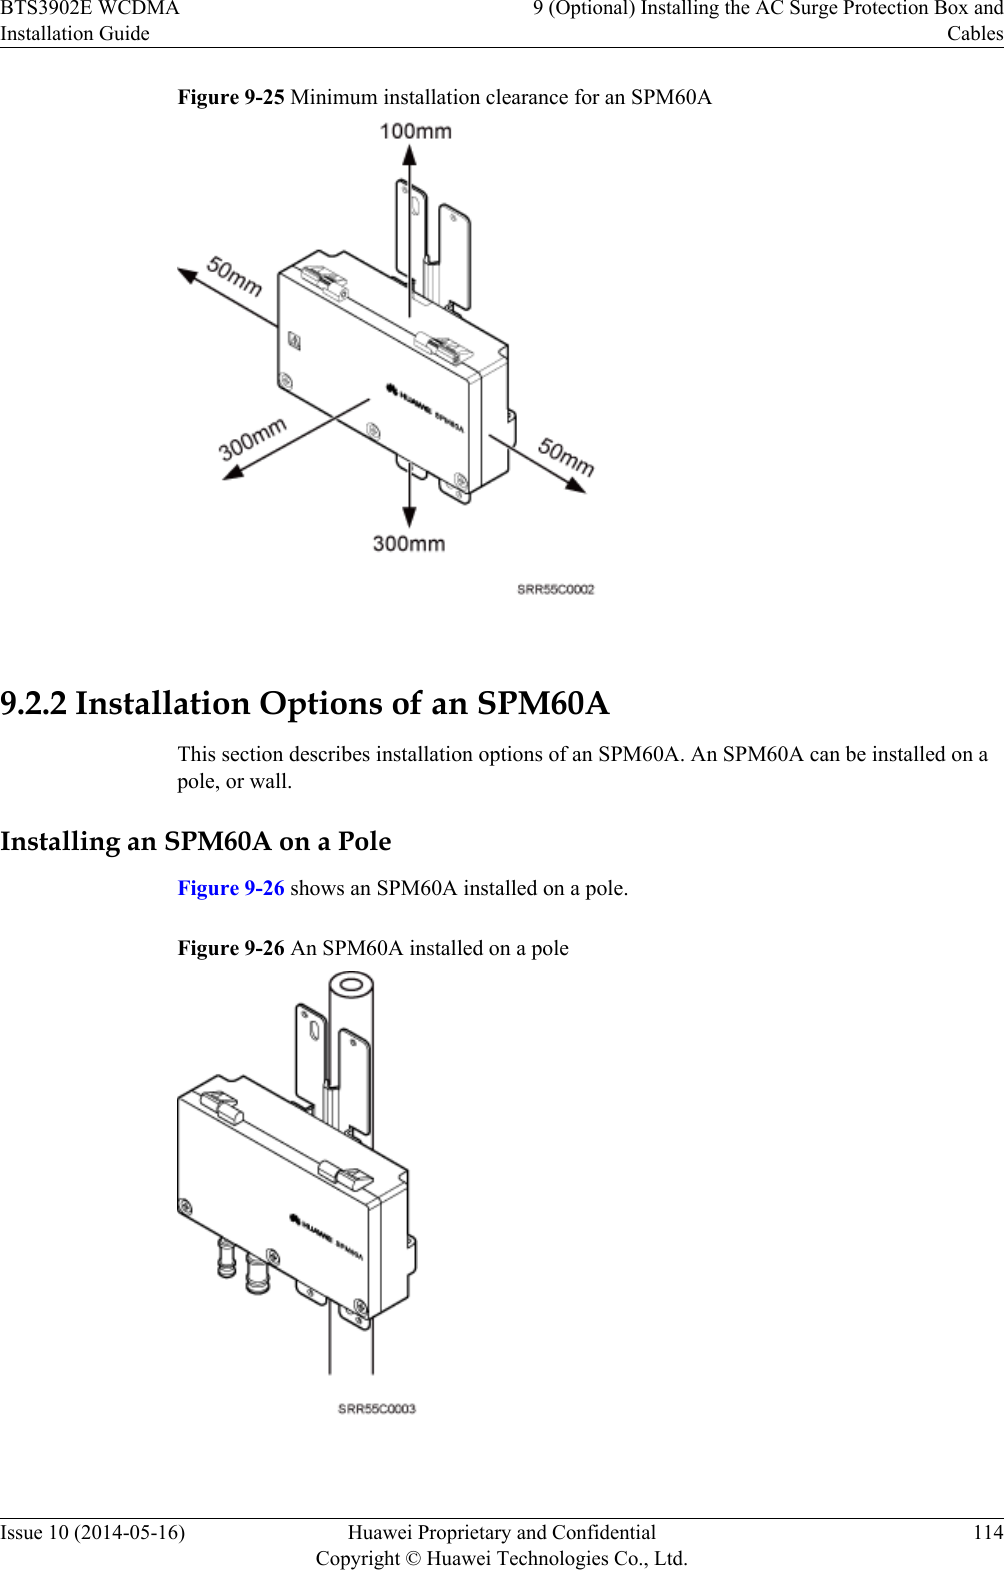 Figure 9-25 Minimum installation clearance for an SPM60A 9.2.2 Installation Options of an SPM60AThis section describes installation options of an SPM60A. An SPM60A can be installed on apole, or wall.Installing an SPM60A on a PoleFigure 9-26 shows an SPM60A installed on a pole.Figure 9-26 An SPM60A installed on a pole BTS3902E WCDMAInstallation Guide9 (Optional) Installing the AC Surge Protection Box andCablesIssue 10 (2014-05-16) Huawei Proprietary and ConfidentialCopyright © Huawei Technologies Co., Ltd.114